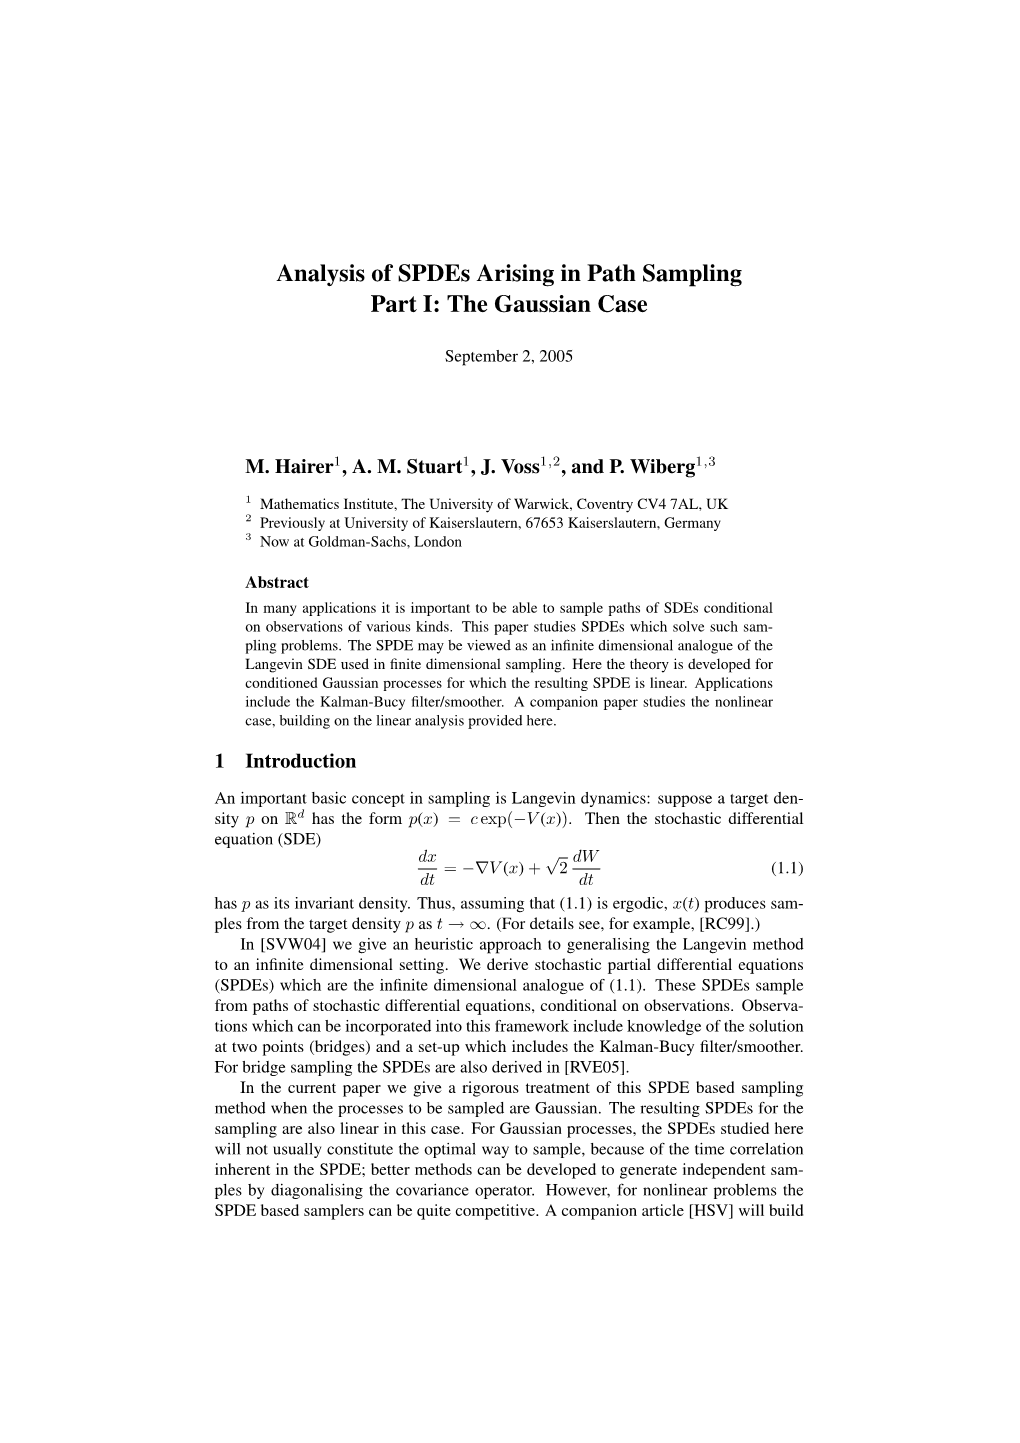 Analysis of Spdes Arising in Path Sampling Part I: the Gaussian Case